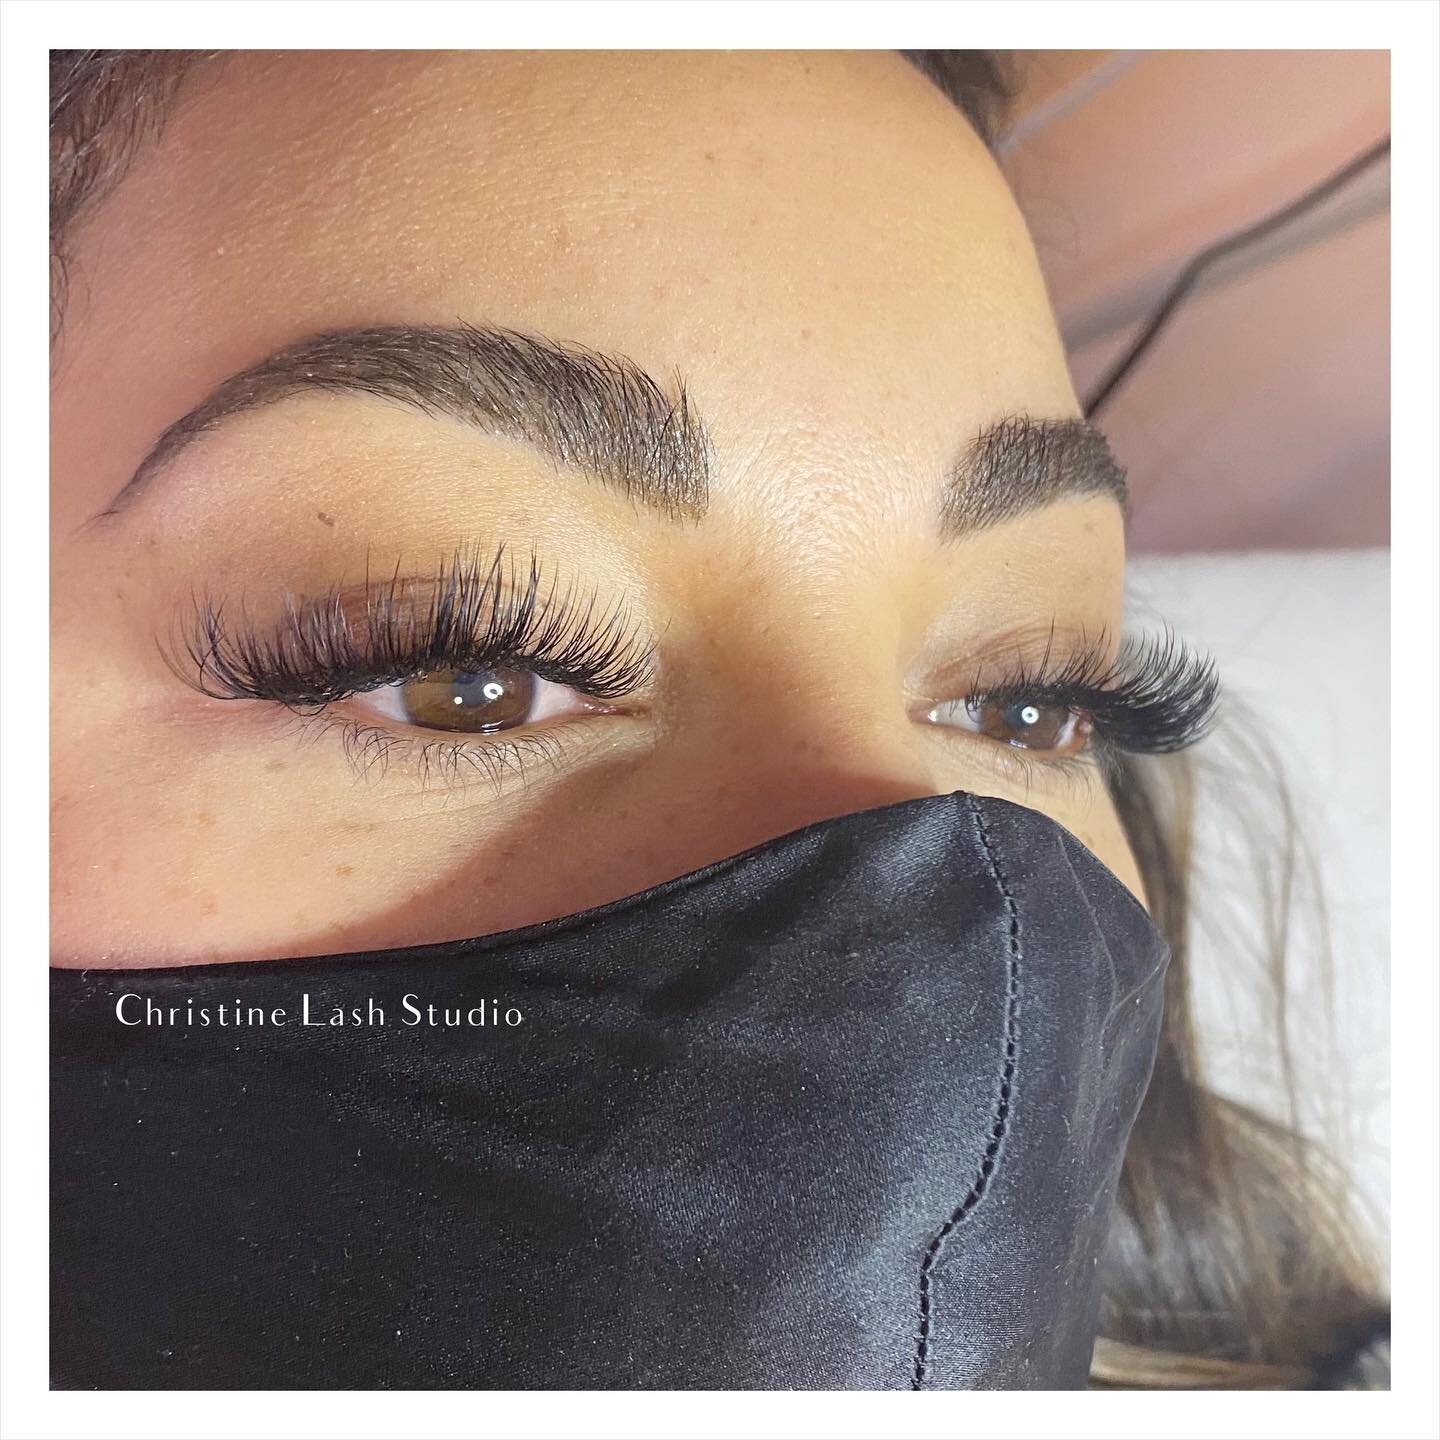 Luxury Volume Hybrid Lashes blending classic individuals with volume extensions!✨
Would you try these blended lashes? 

#luxury #lashextensions #lashes #lashesnyc #nyclashextensions 
#beautystudio #lashartist #lashboss #newyorklashes #volumelashes #h